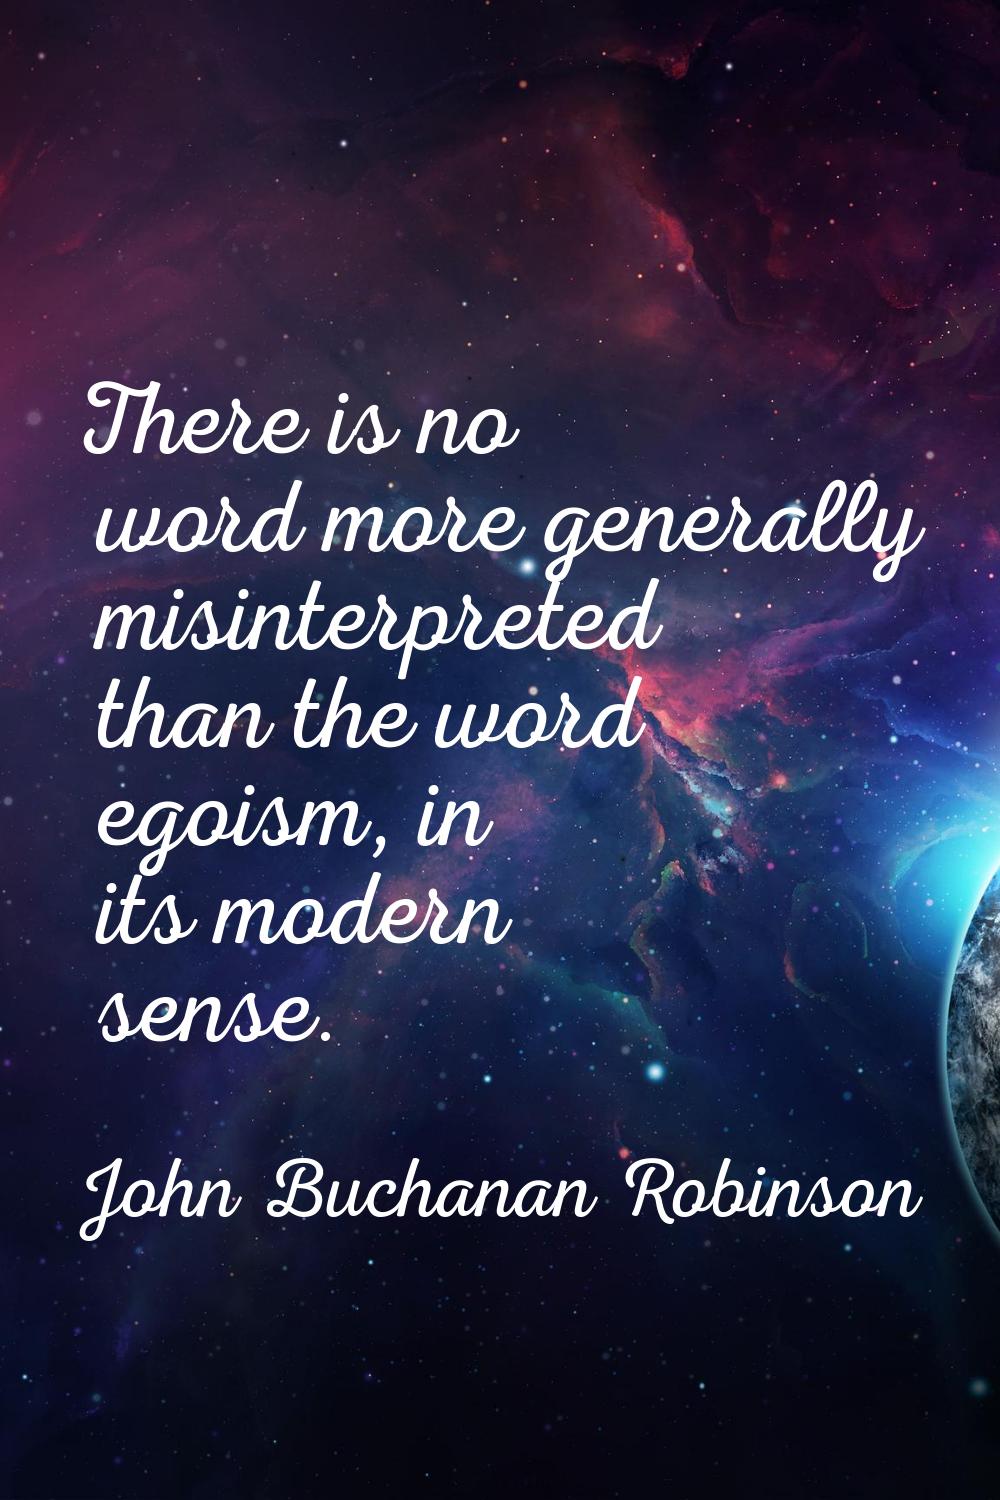 There is no word more generally misinterpreted than the word egoism, in its modern sense.